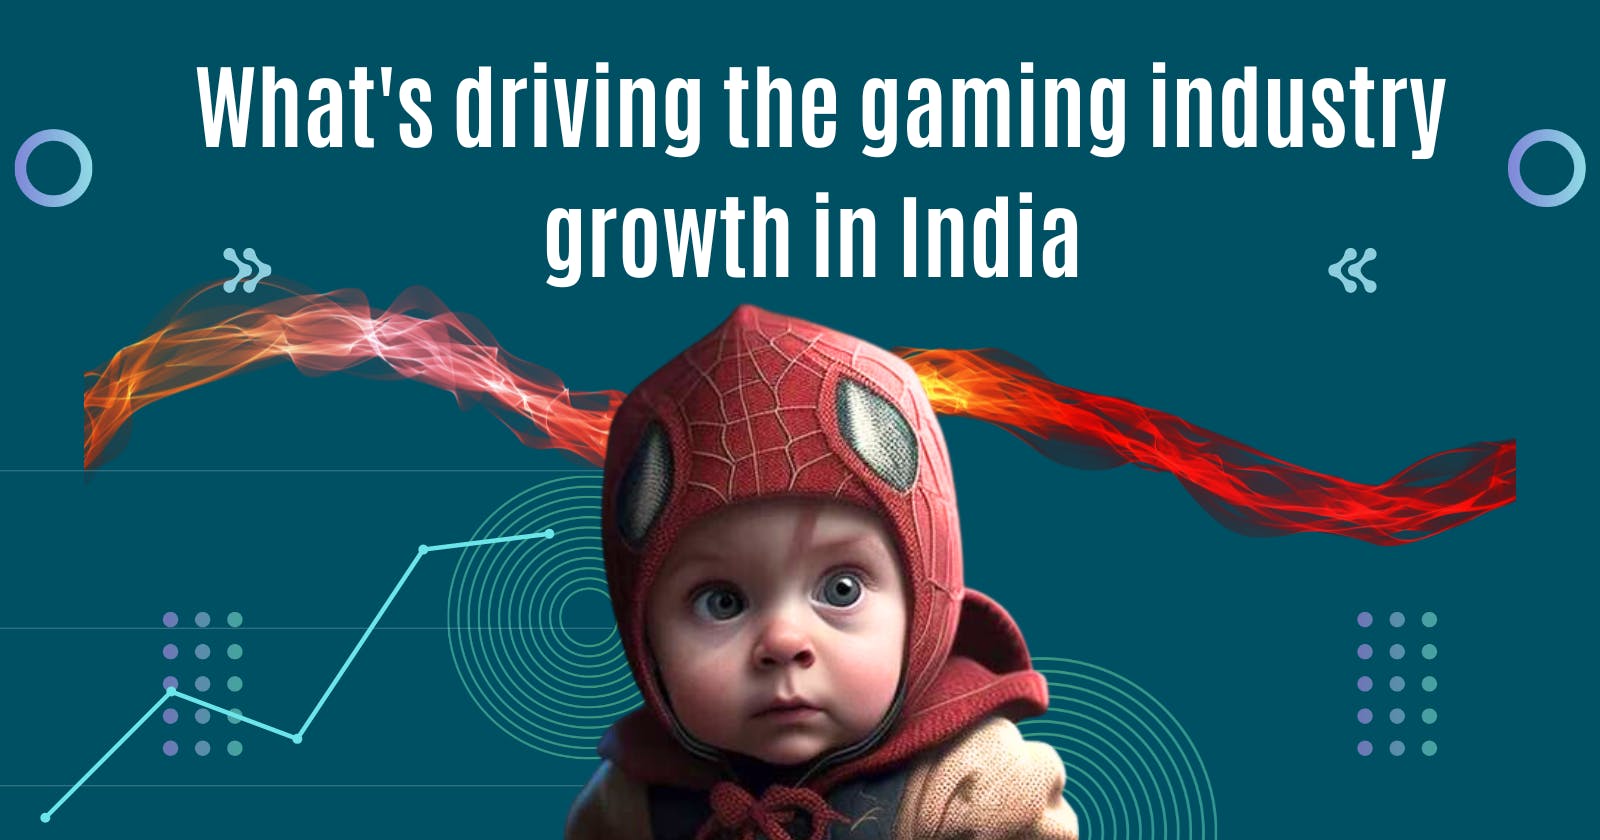 What's driving the gaming industry growth in India and what trends do you think will take off in the sector in the future?